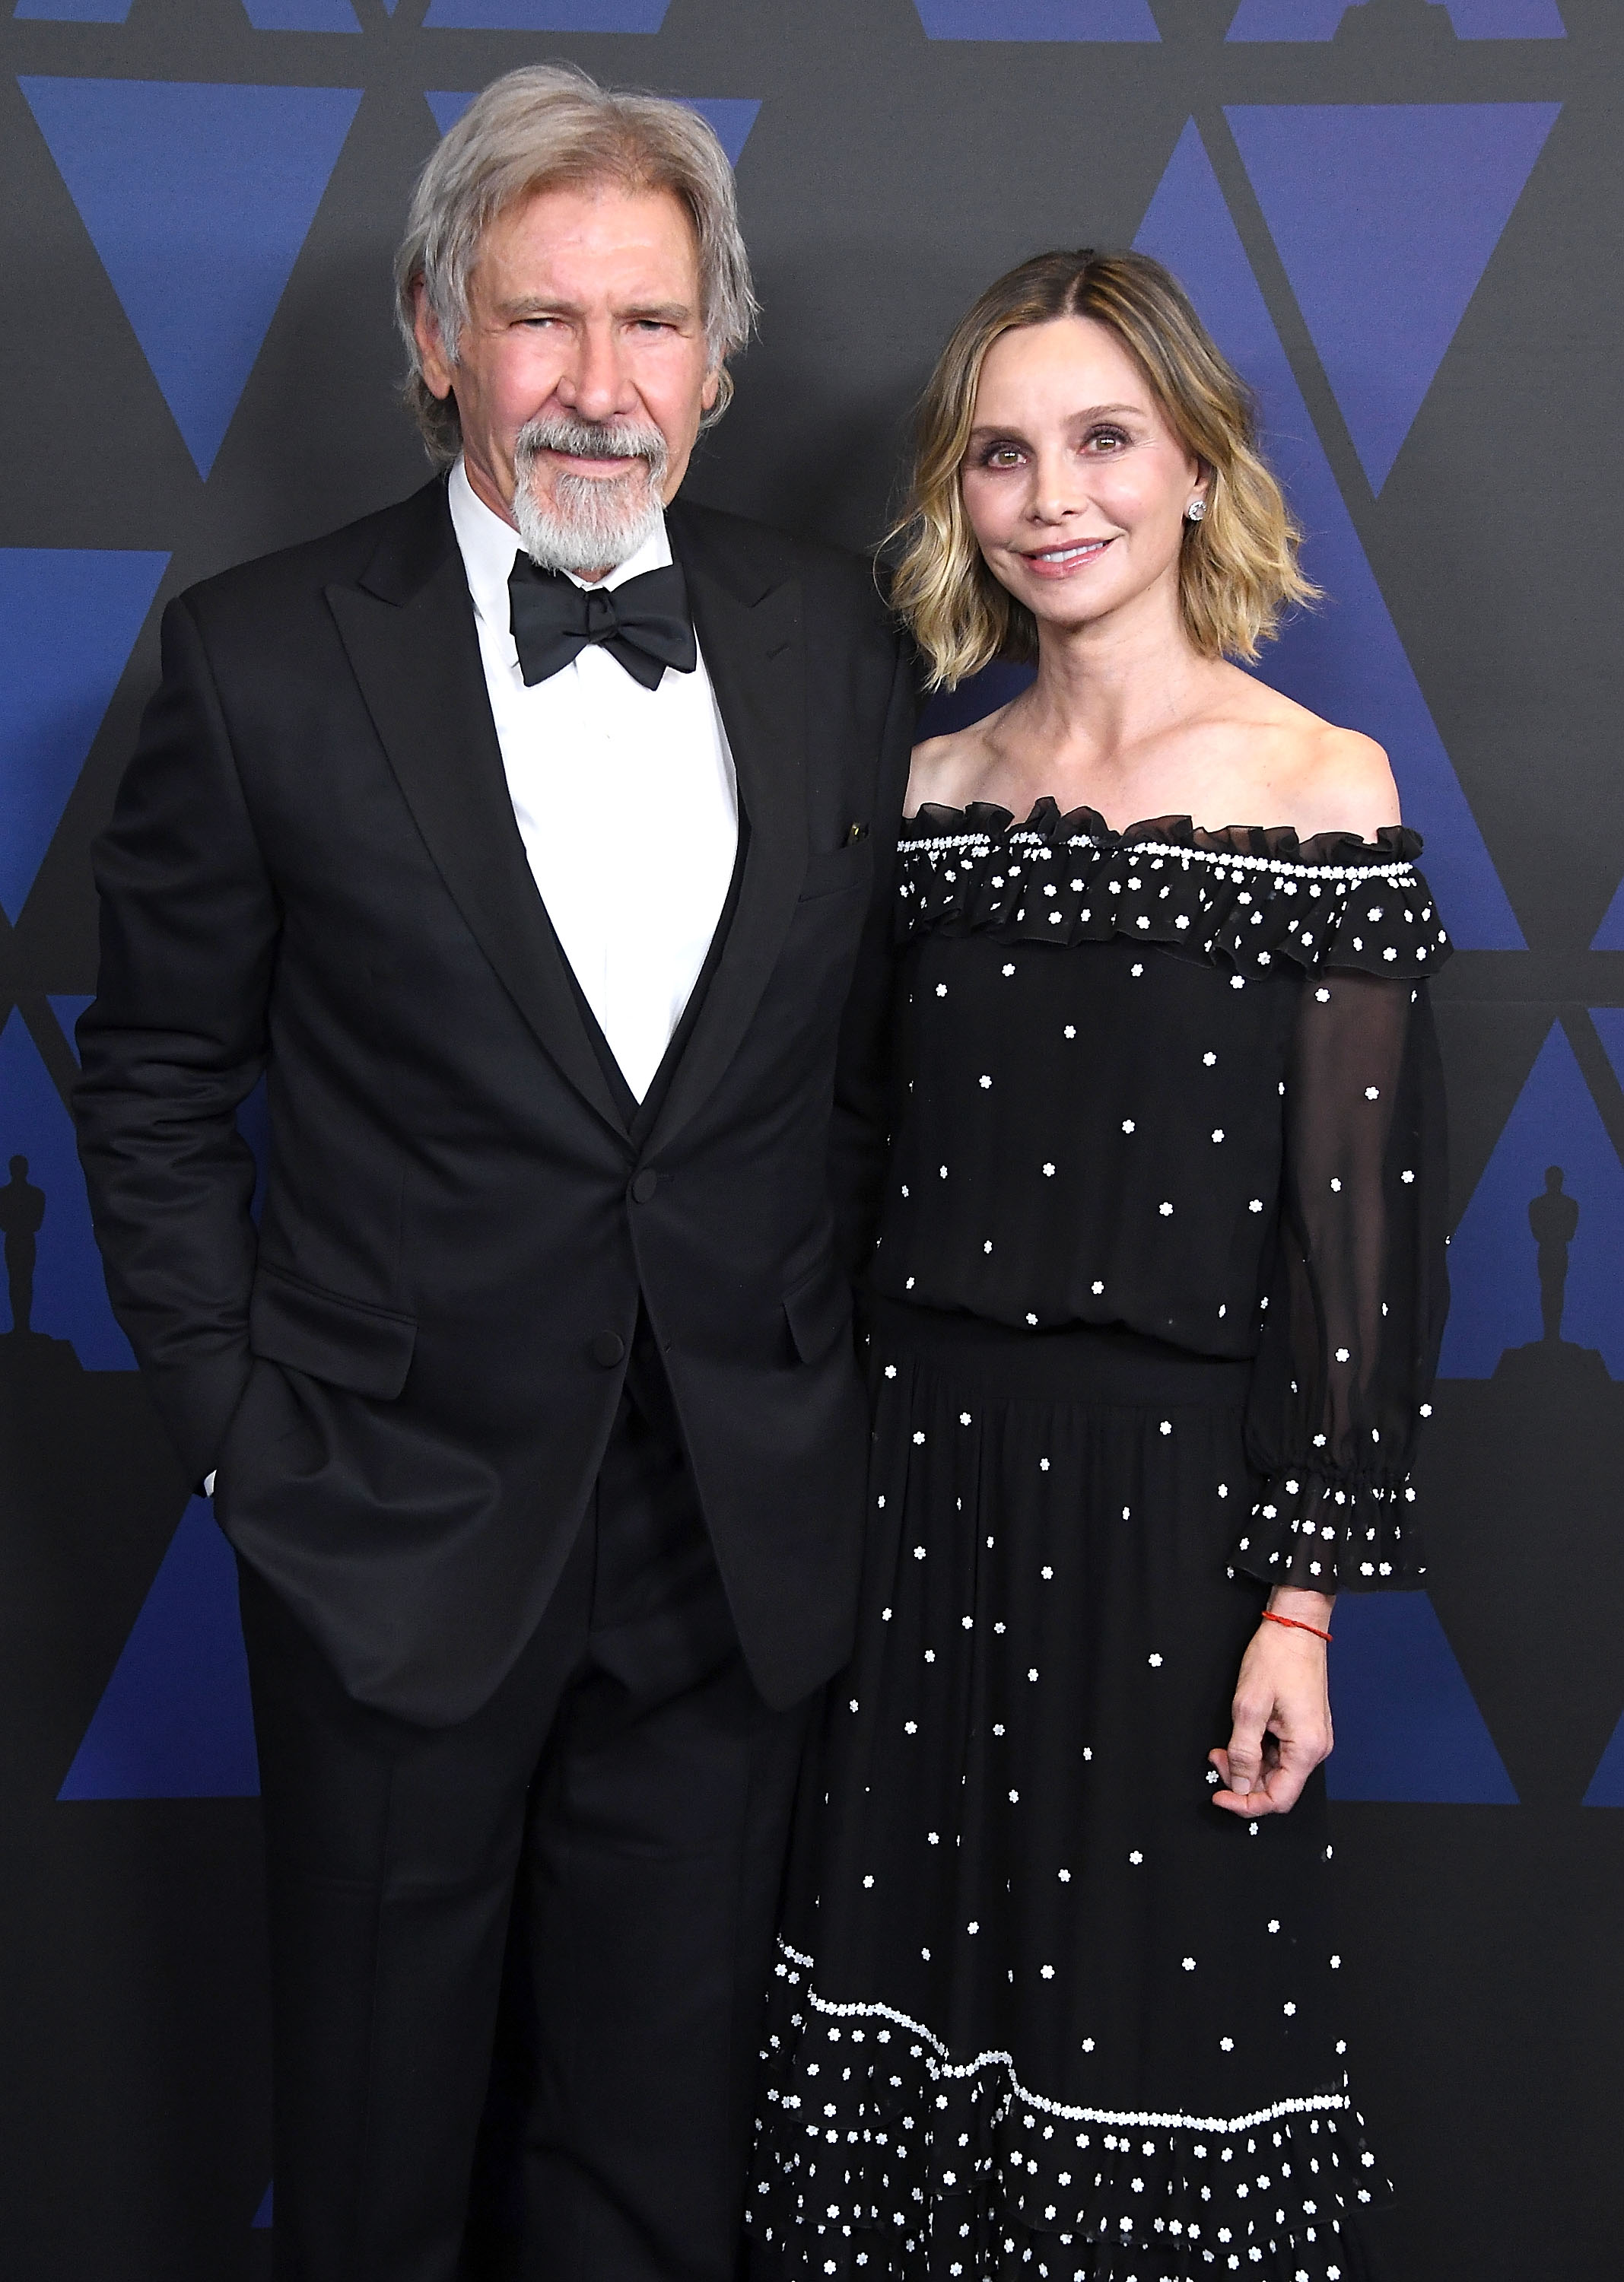 Actor Harrison Ford and his wife, actress Calista Flockhart arrive at the Academy Of Motion Picture Arts And Sciences' 10th Annual Governors Awards at The Ray Dolby Ballroom at Hollywood & Highland Center on November 18, 2018 in Hollywood, California ┃Source: Getty Images